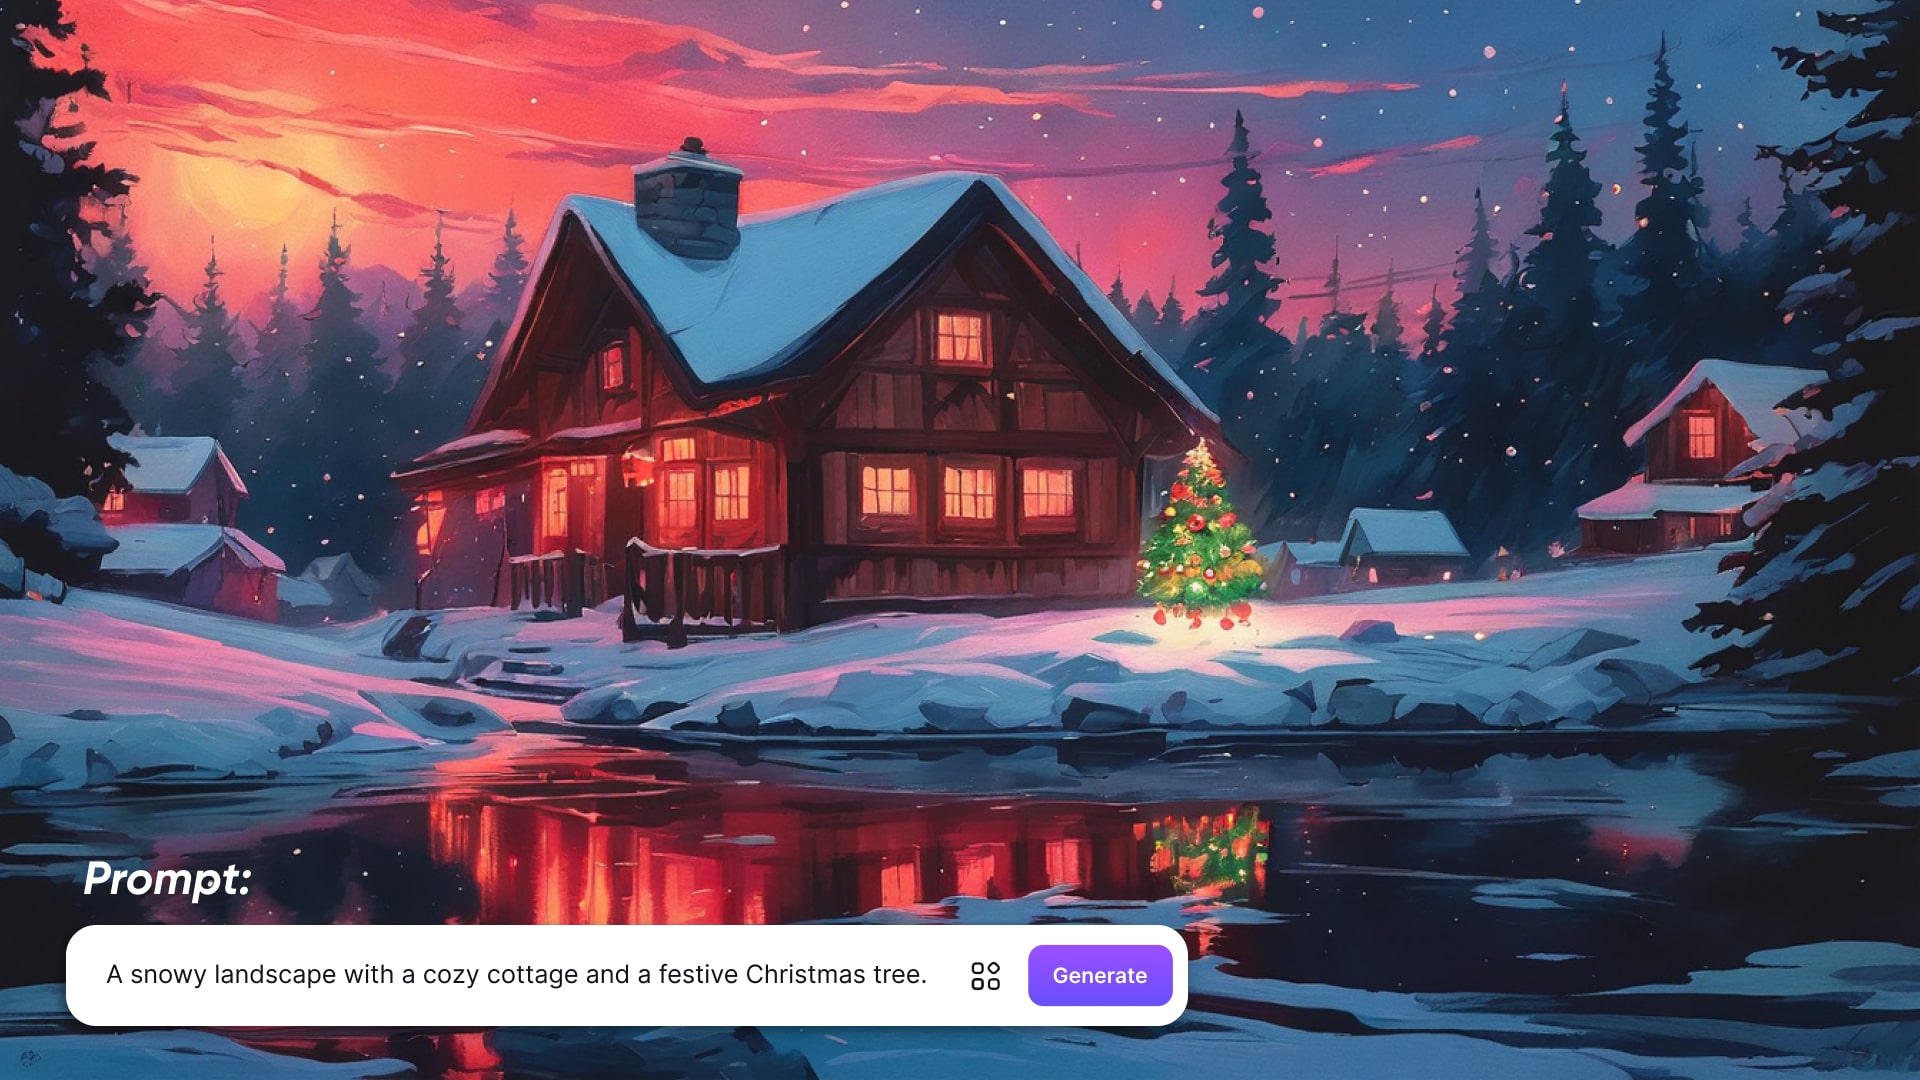 A snowy landscape with a cozy cottage and a festive Christmas tree.